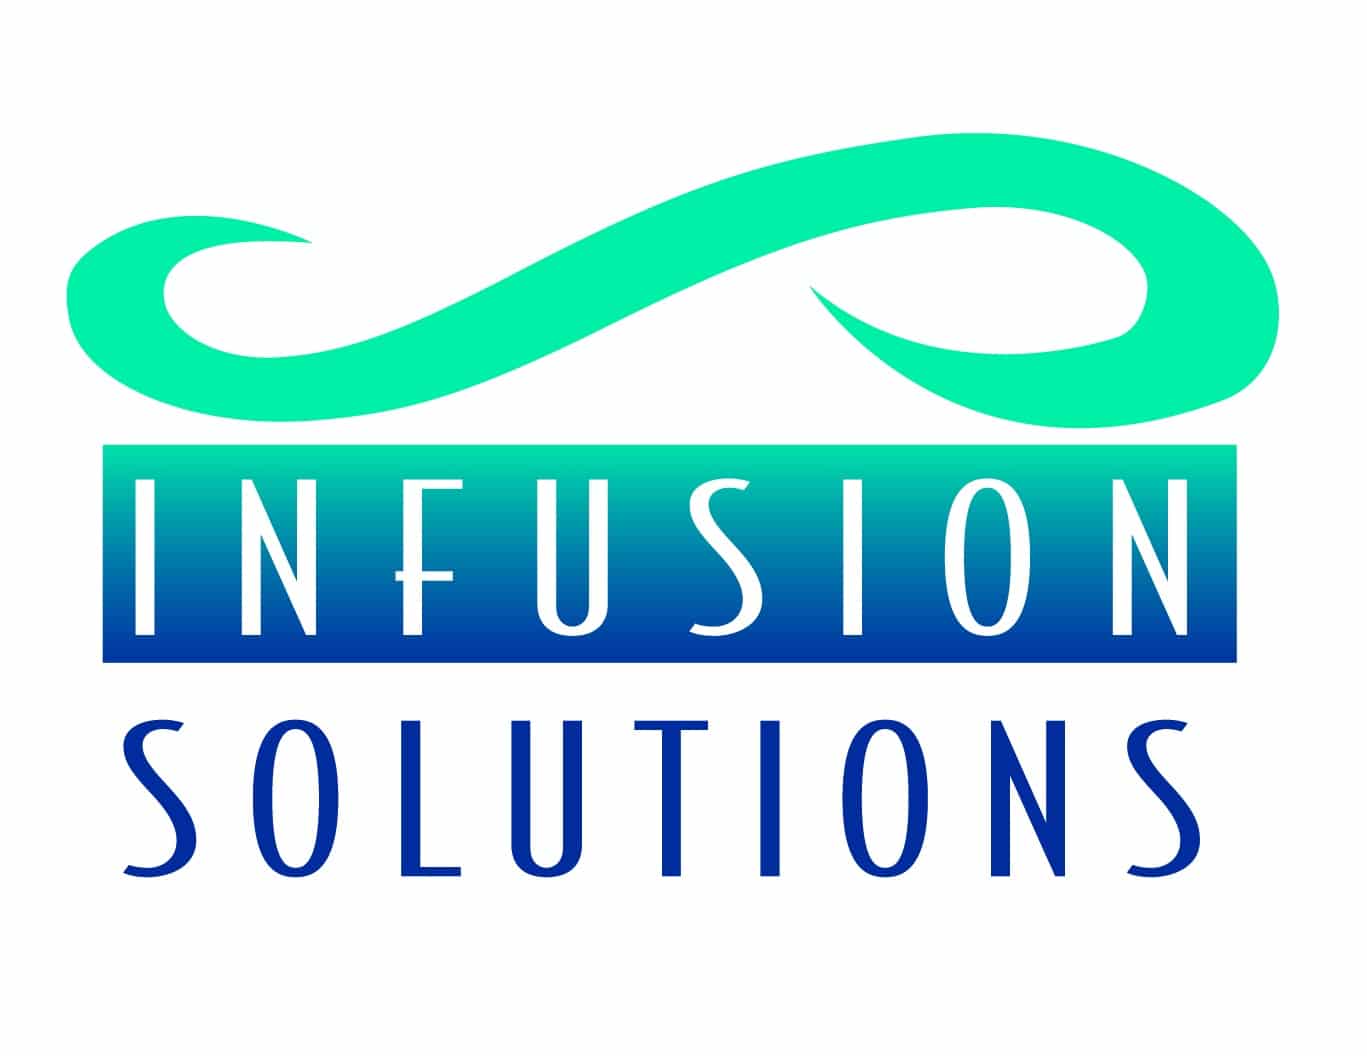 https://camcfoundation.org/wp-content/uploads/2021/04/infusion-solutions-logo.jpg